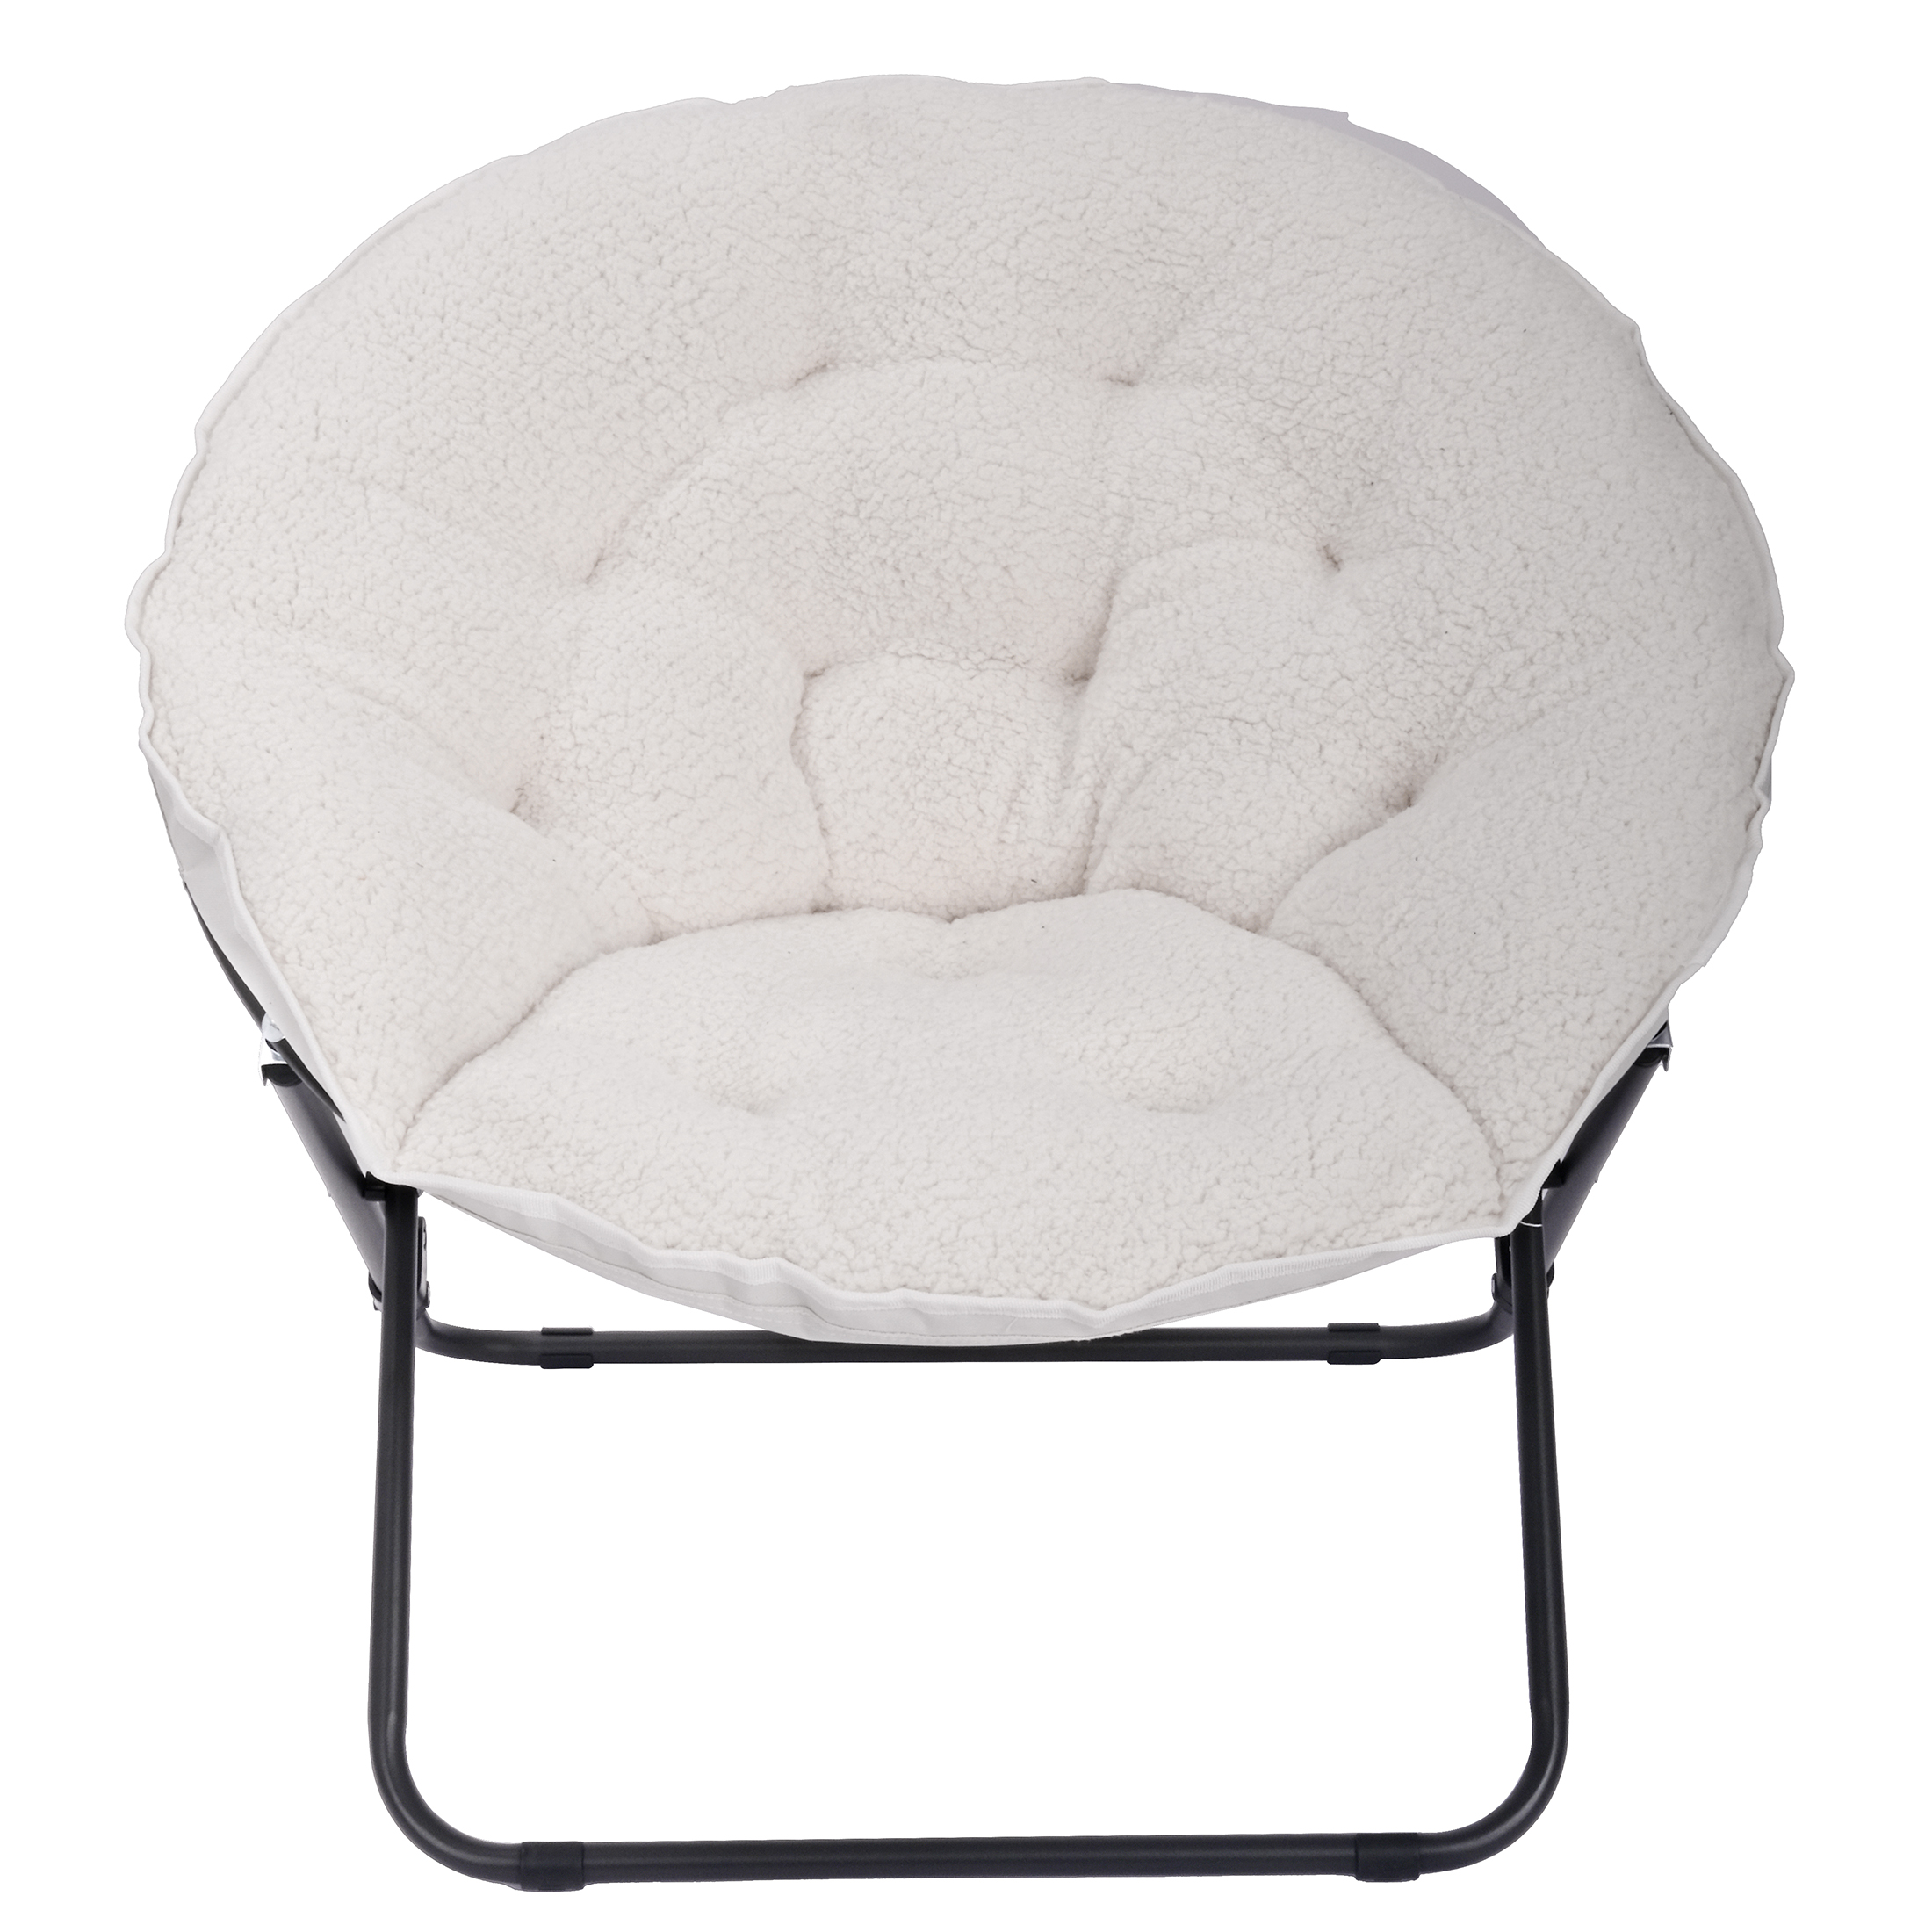 Mainstays Saucer Chair for Kids and Teens, White Faux Shearling - image 1 of 7